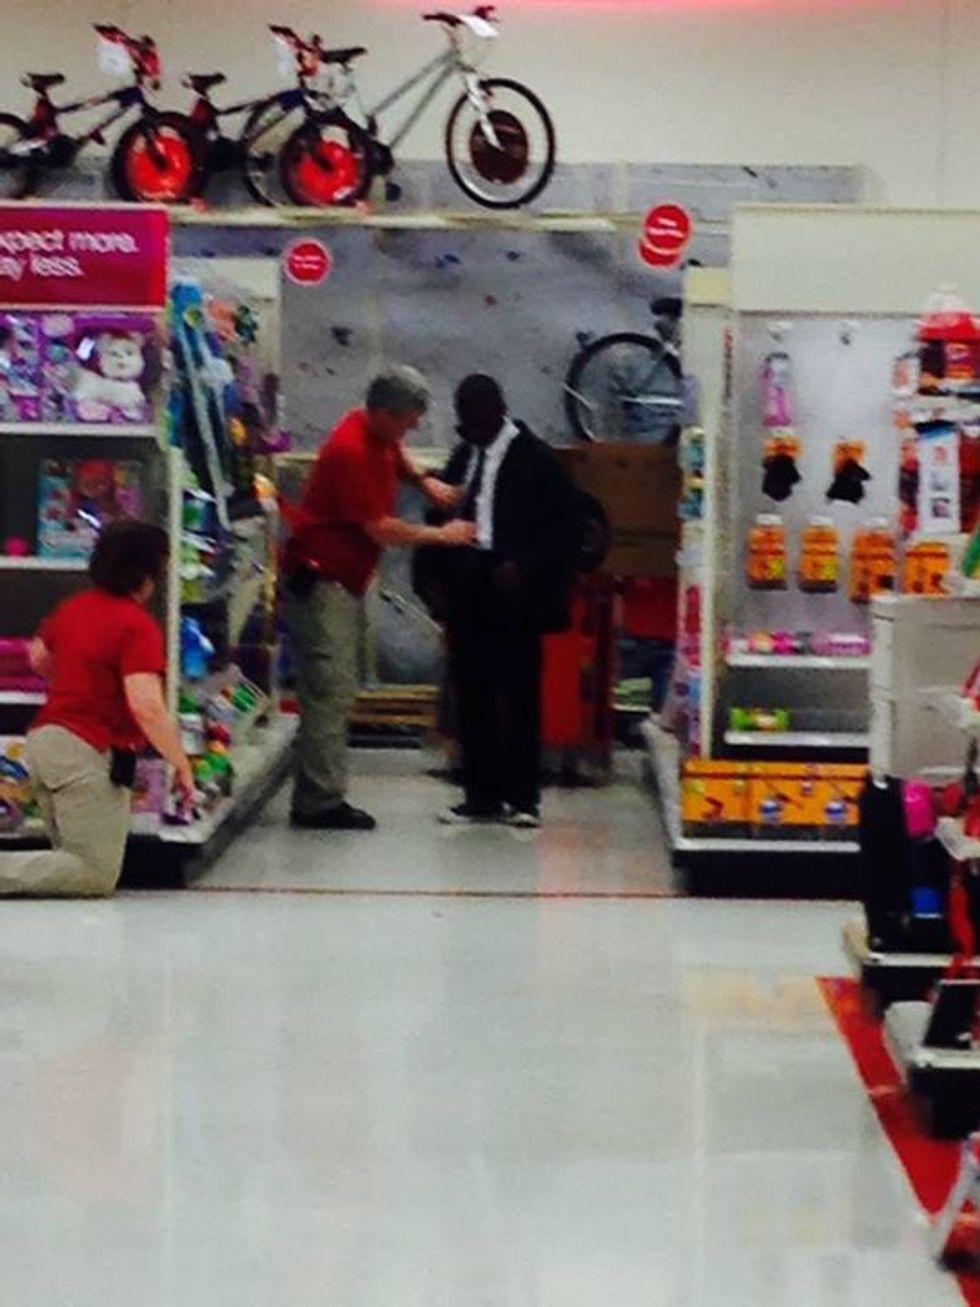 Woman Walking Through Target Noticed Something Out of the Ordinary Going On. So She Took a Picture.